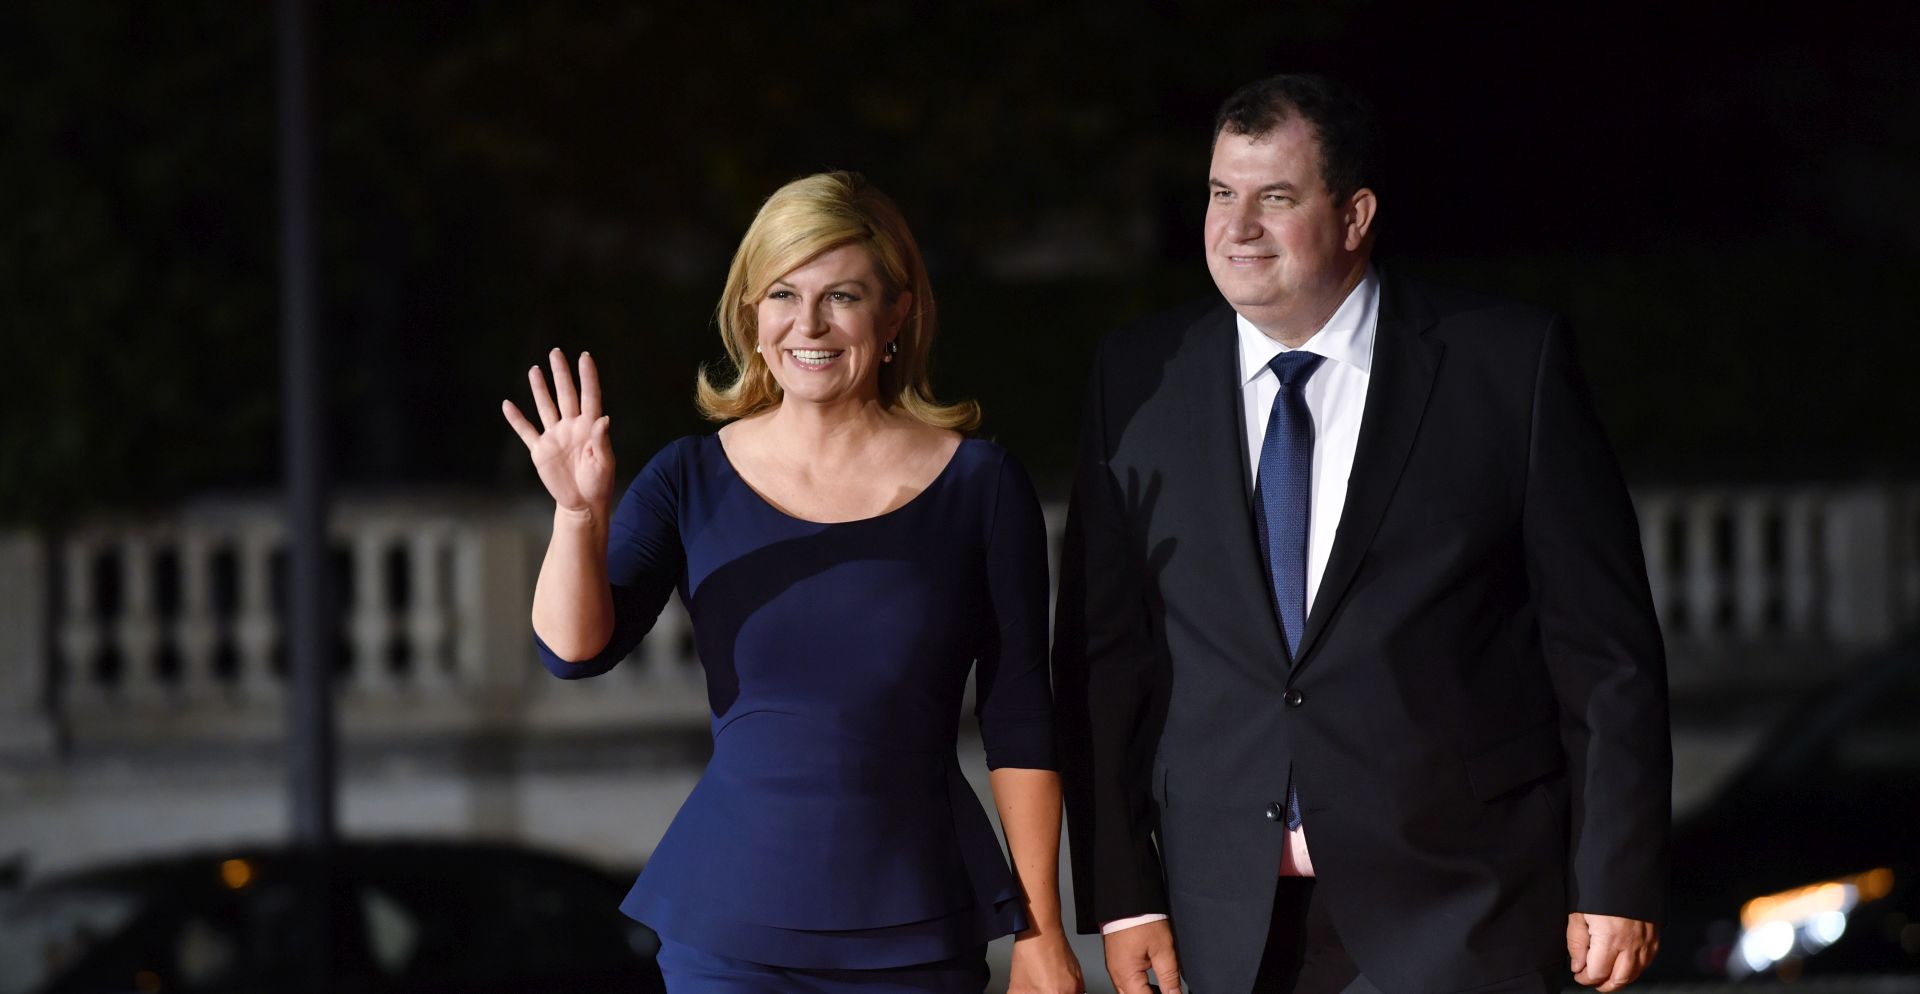 epa07156736 Croatian President Kolinda Grabar-Kitarovic (L) and husband Jakov Kitarovic arrive at the official dinner on the eve of the international ceremony for the Centenary of the WWI Armistice of 11 November 1918 at the Orsay museum in Paris, France, 10 November 2018. Heads of State and Government commemorate the memory of their fallen soldiers in France.  EPA/JULIEN DE ROSA